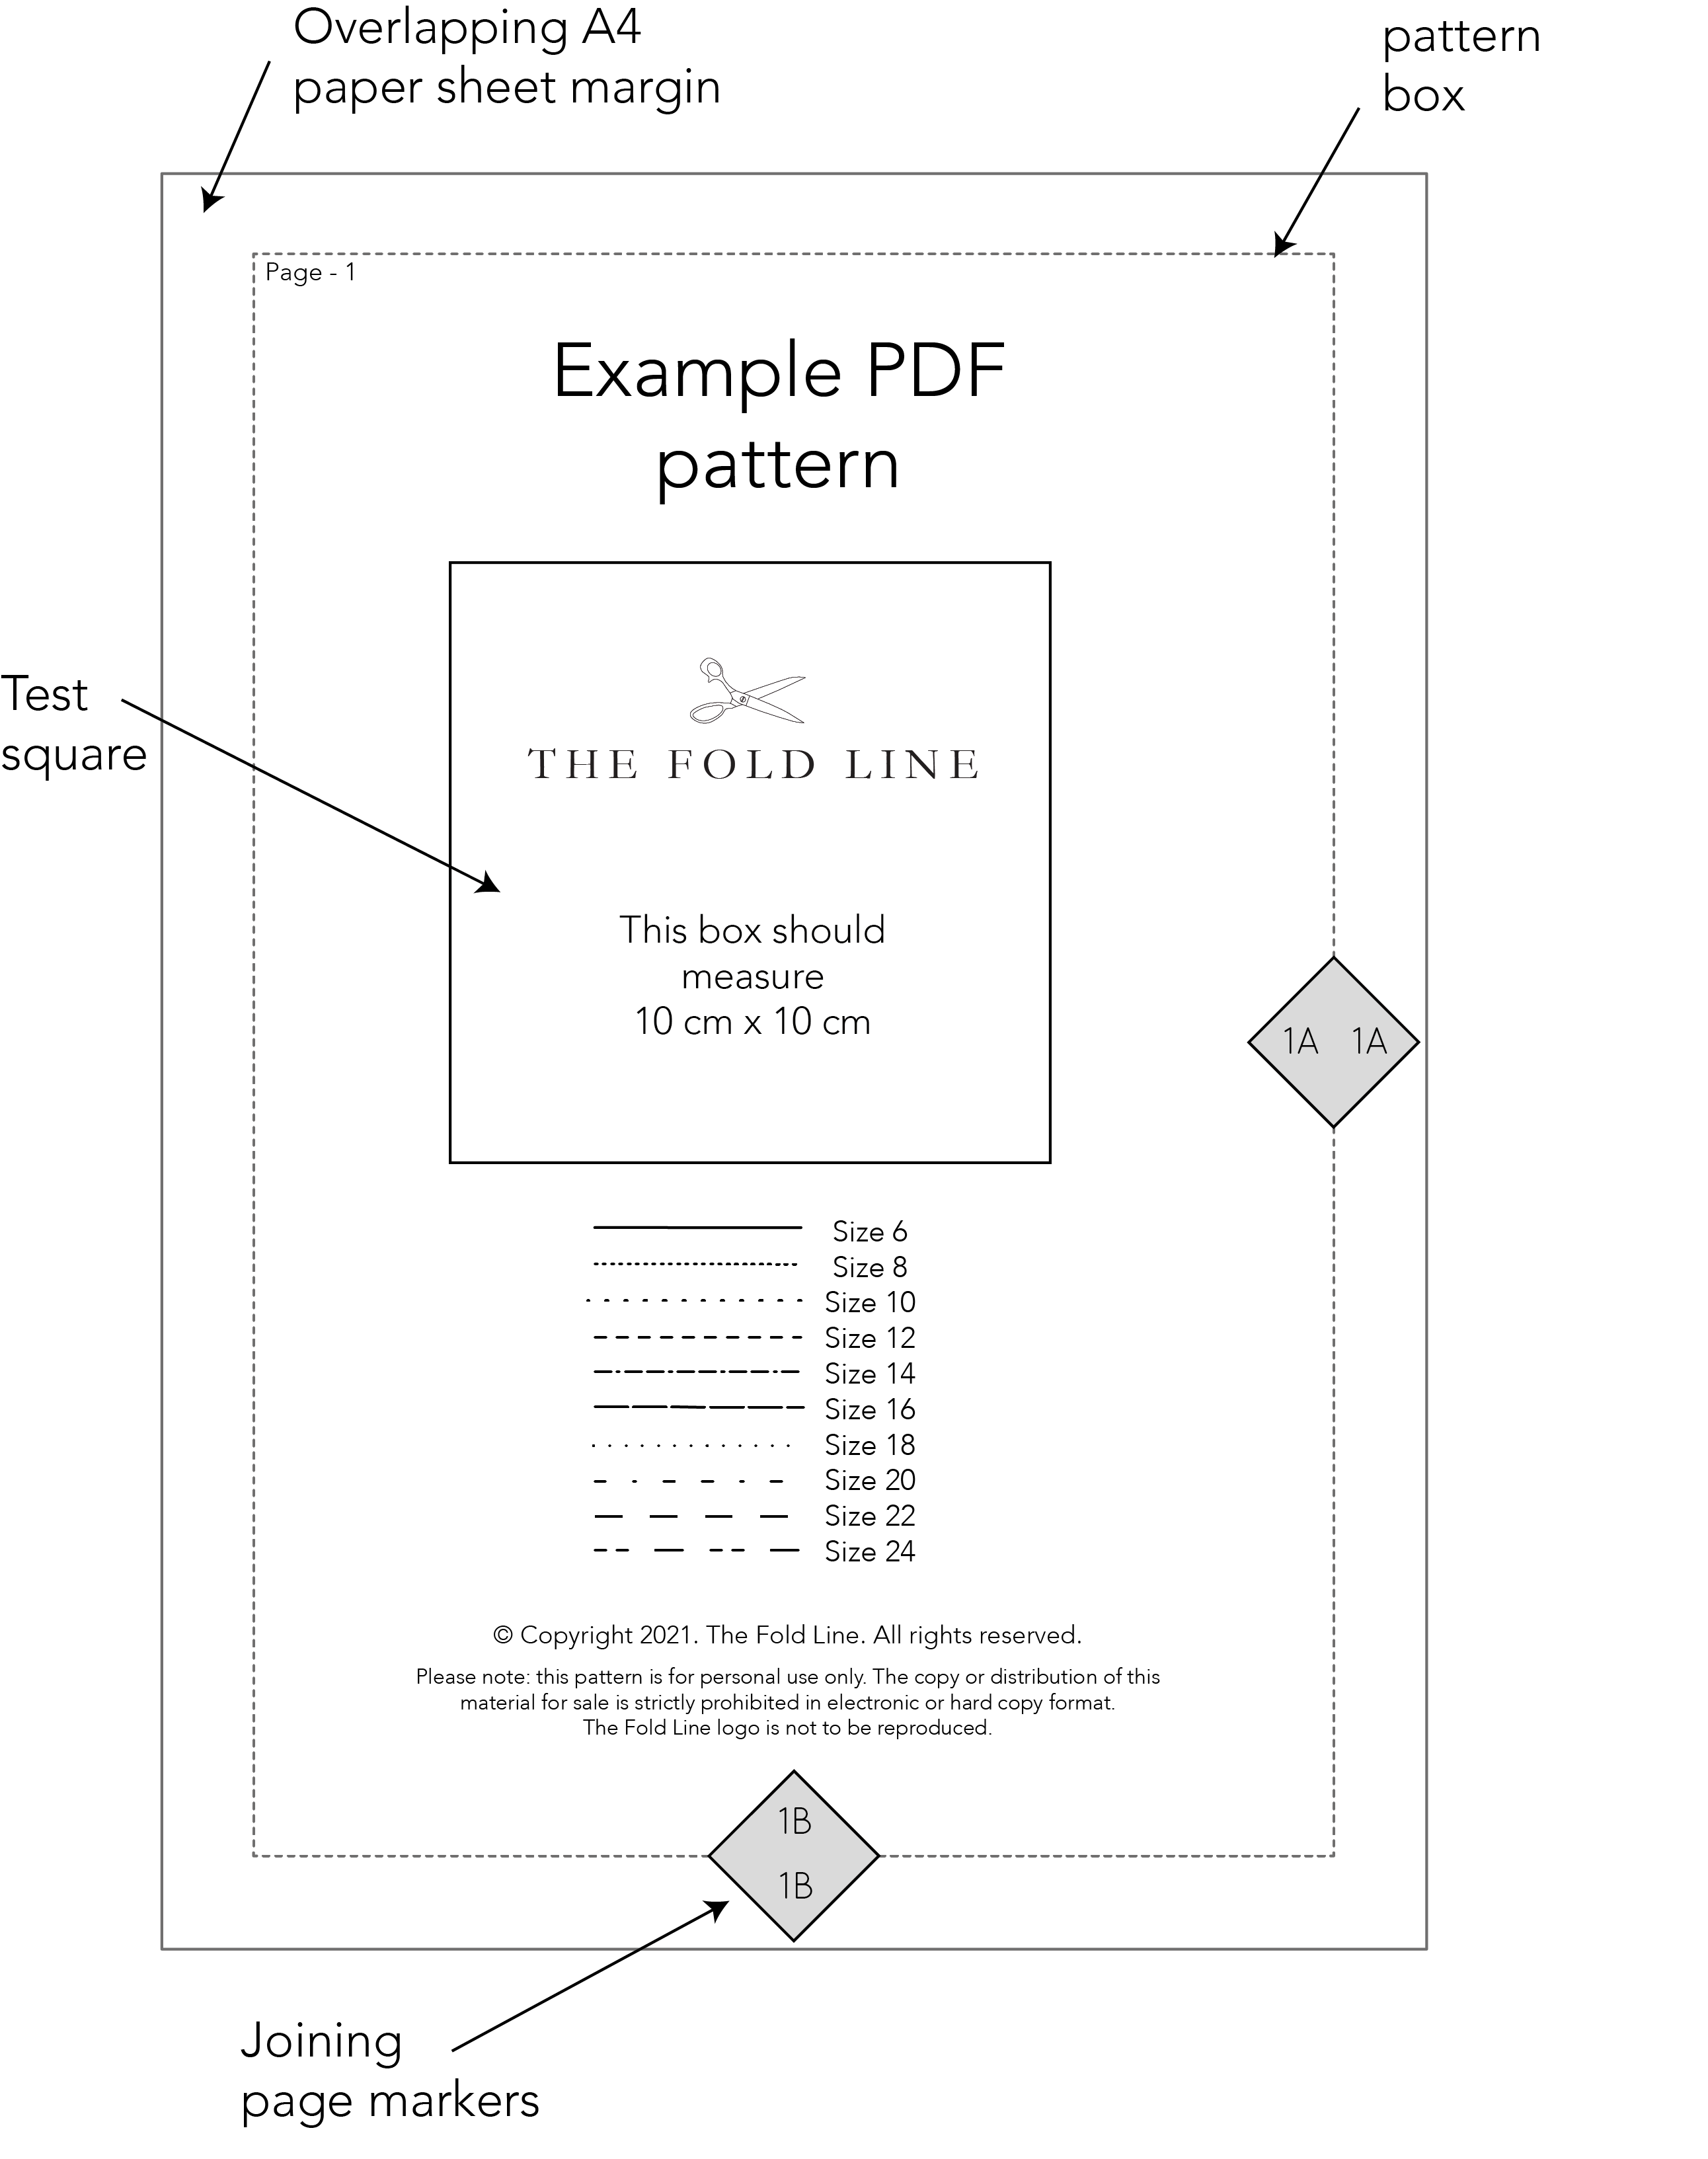 The Sewing Pattern Tutorials 14: Printing Copy Shop and PDF Sewing Patterns  - The Fold Line